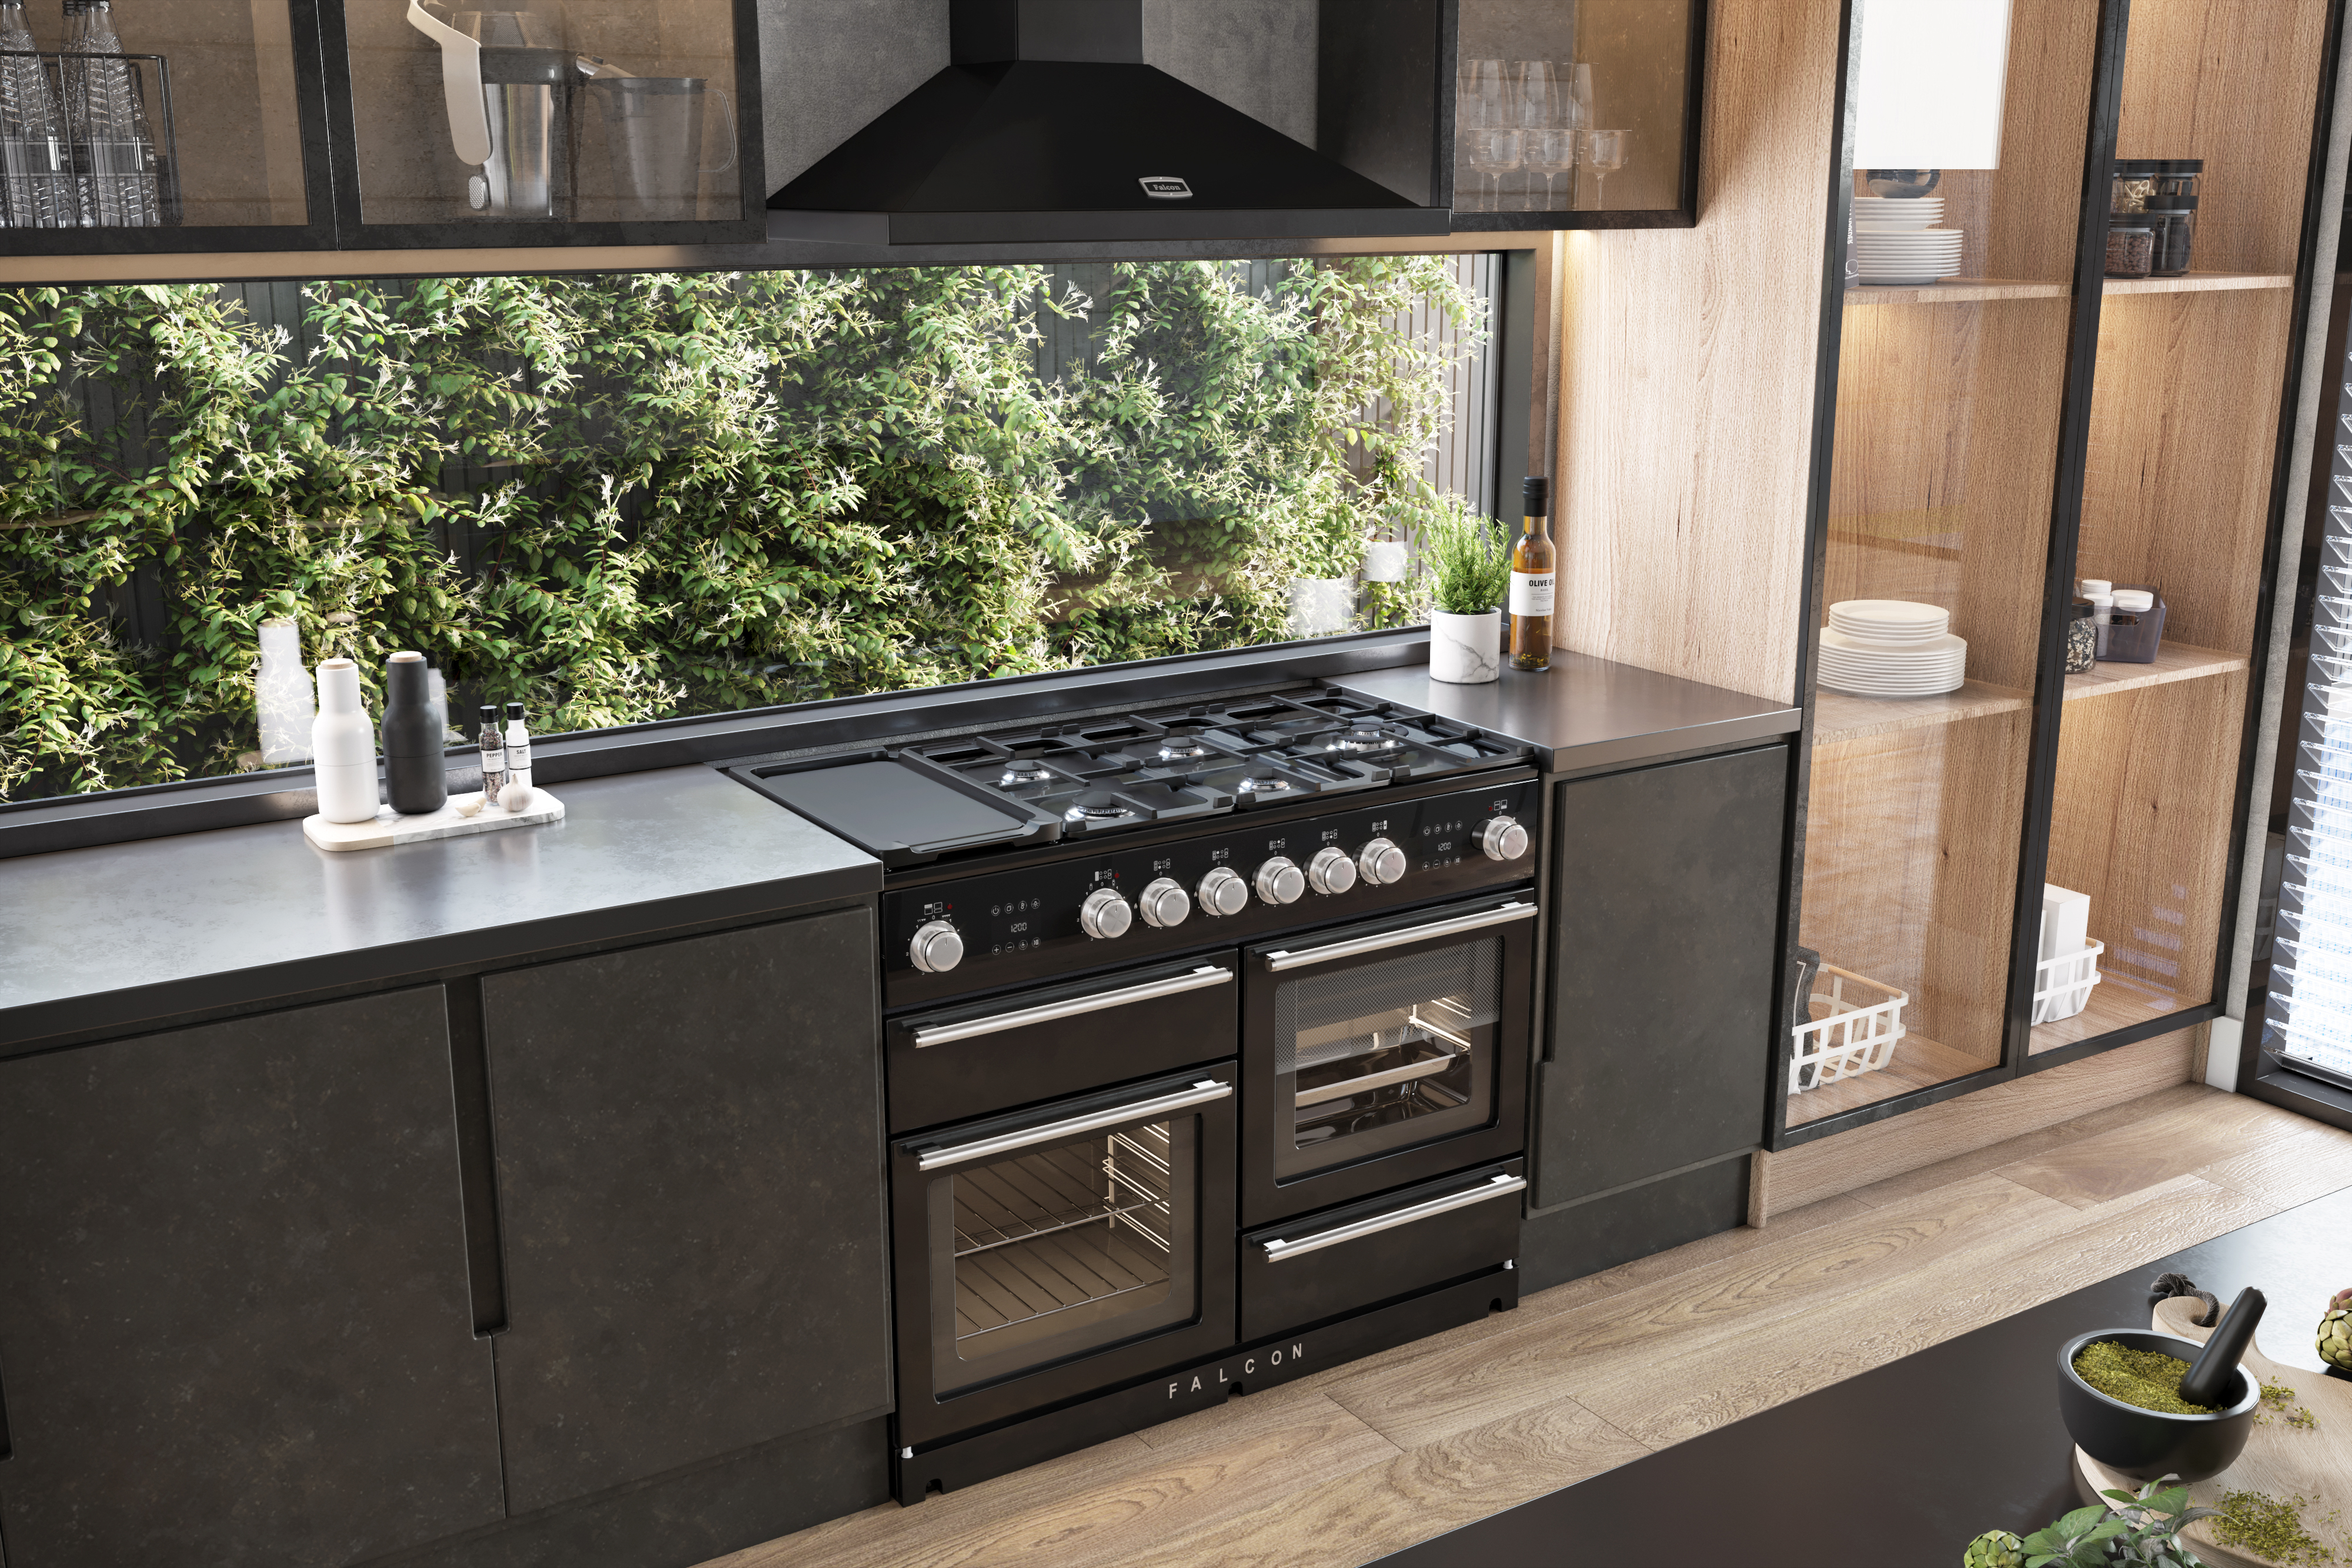 Save Up To 20%* On Falcon Appliances at Hart & Co